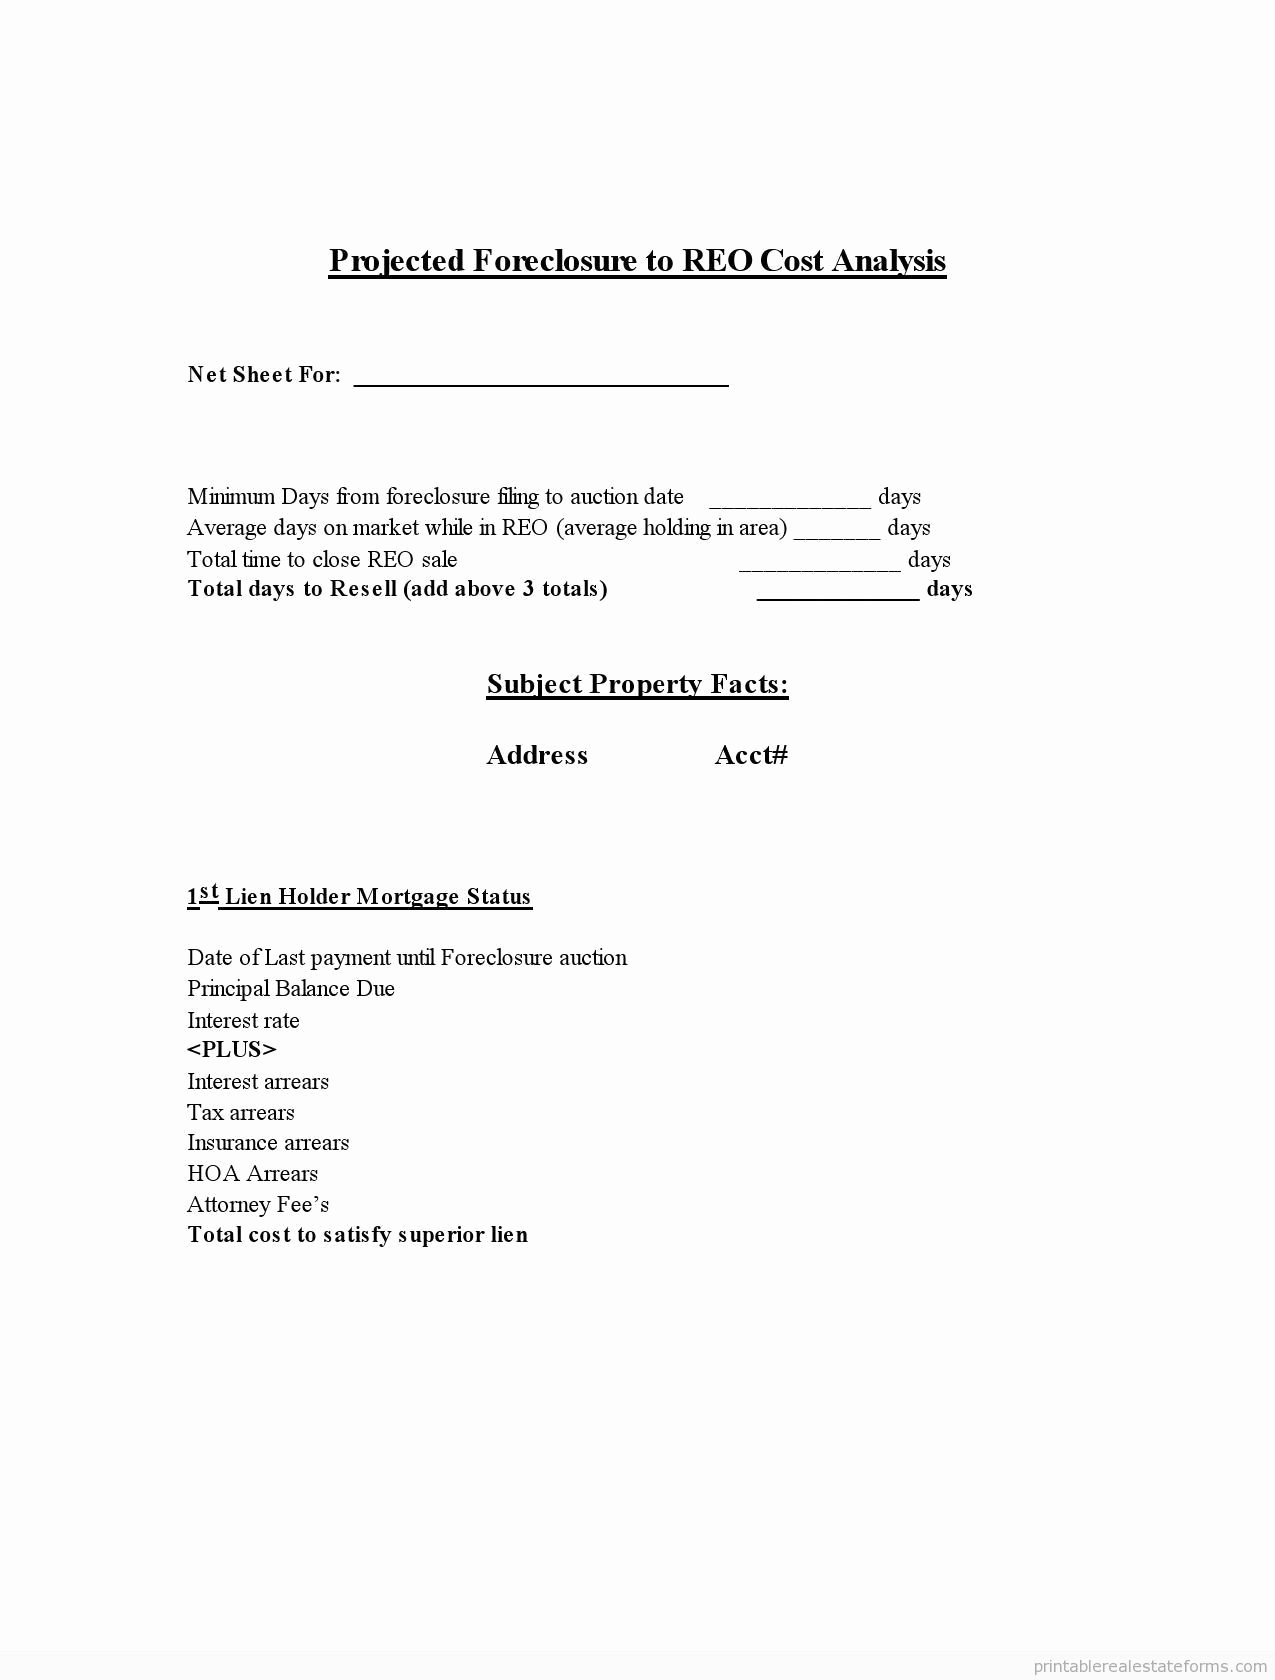 Foreclosure Letter Templates New Sample Printable Copy Of Projected foreclosure to Reo Cost